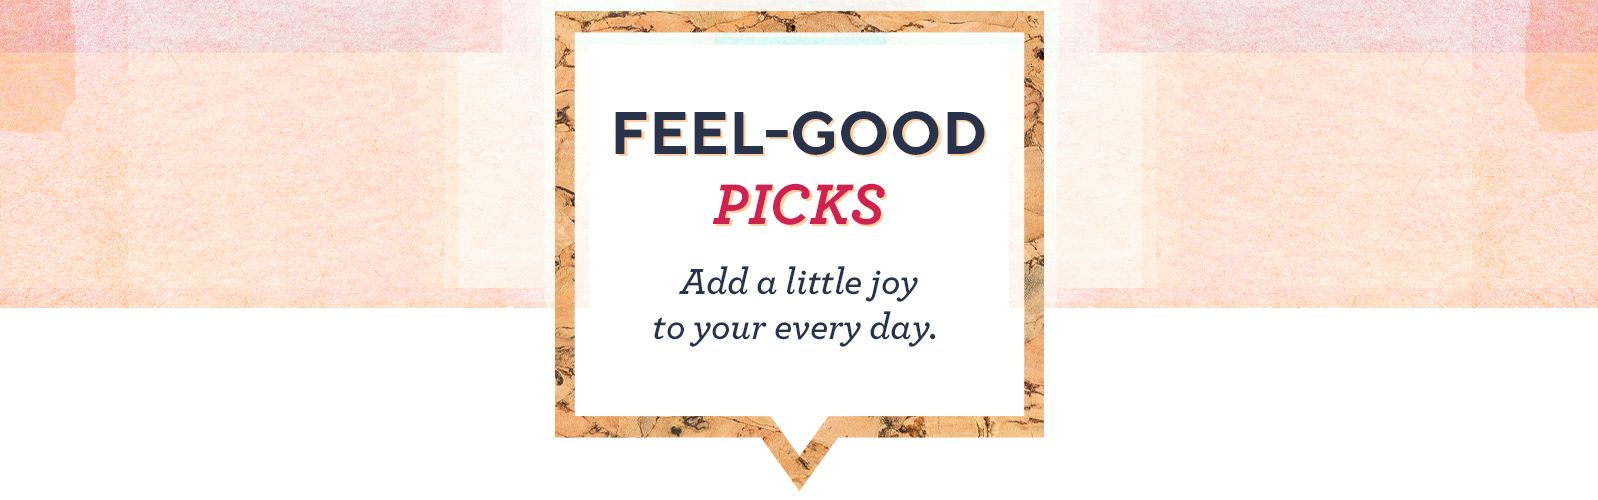 Feel-Good Picks. Add a little joy to your every day.  